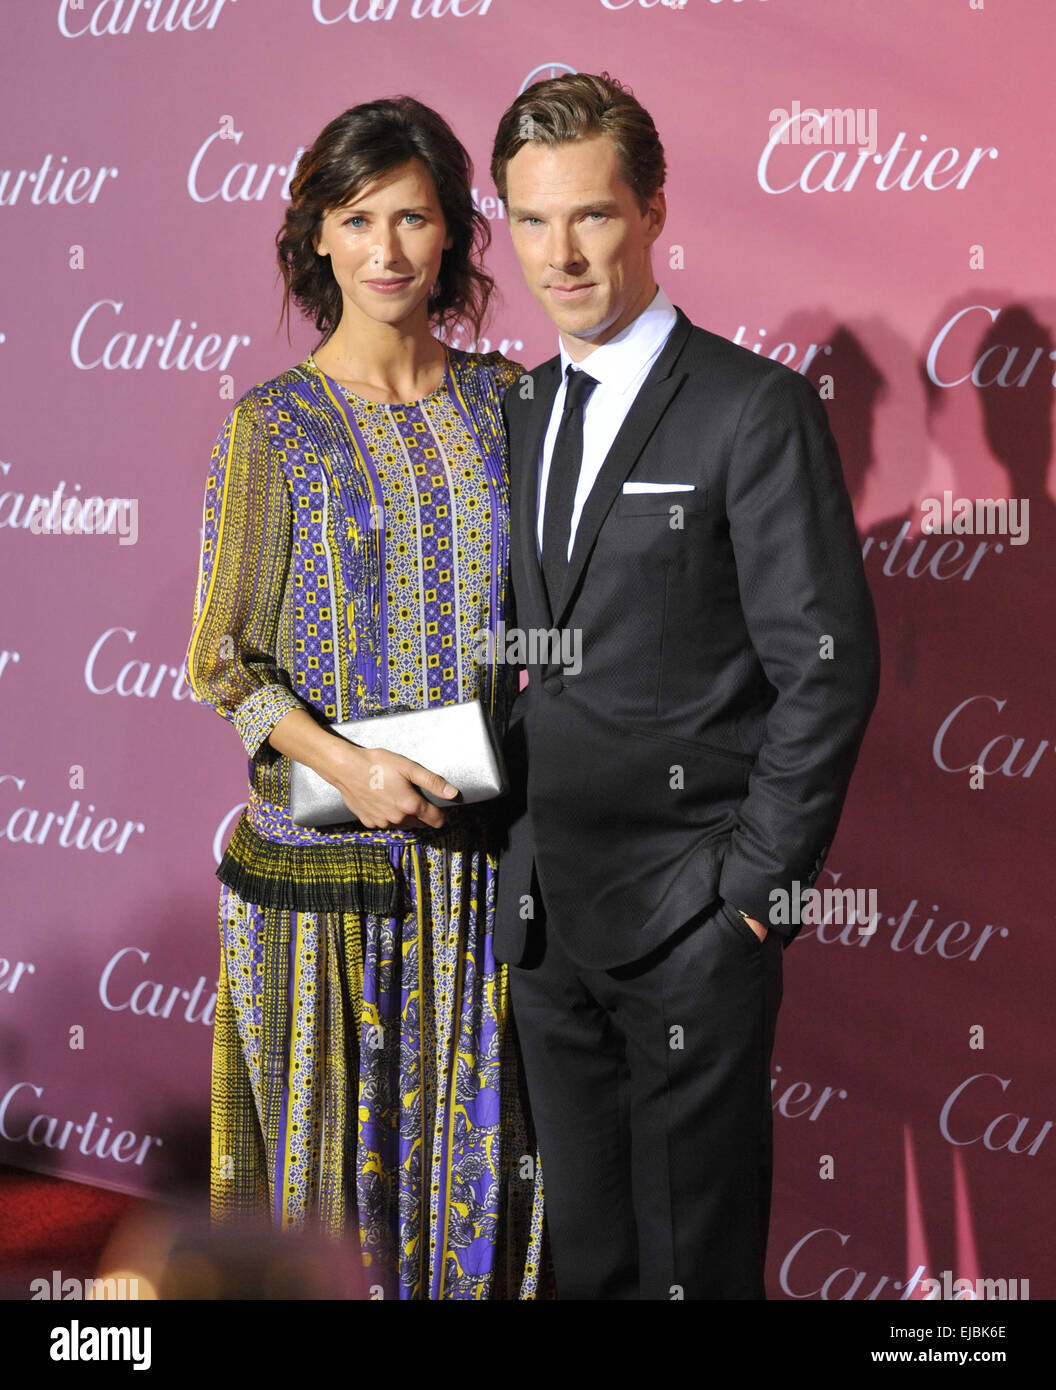 PALM SPRINGS, CA - JANUARY 6, 2015: Benedict Cumberbatch & fiancée Sophie Hunter at the 2015 Palm Springs Film Festival Awards Gala at the Palm Springs Convention Centre. Stock Photo